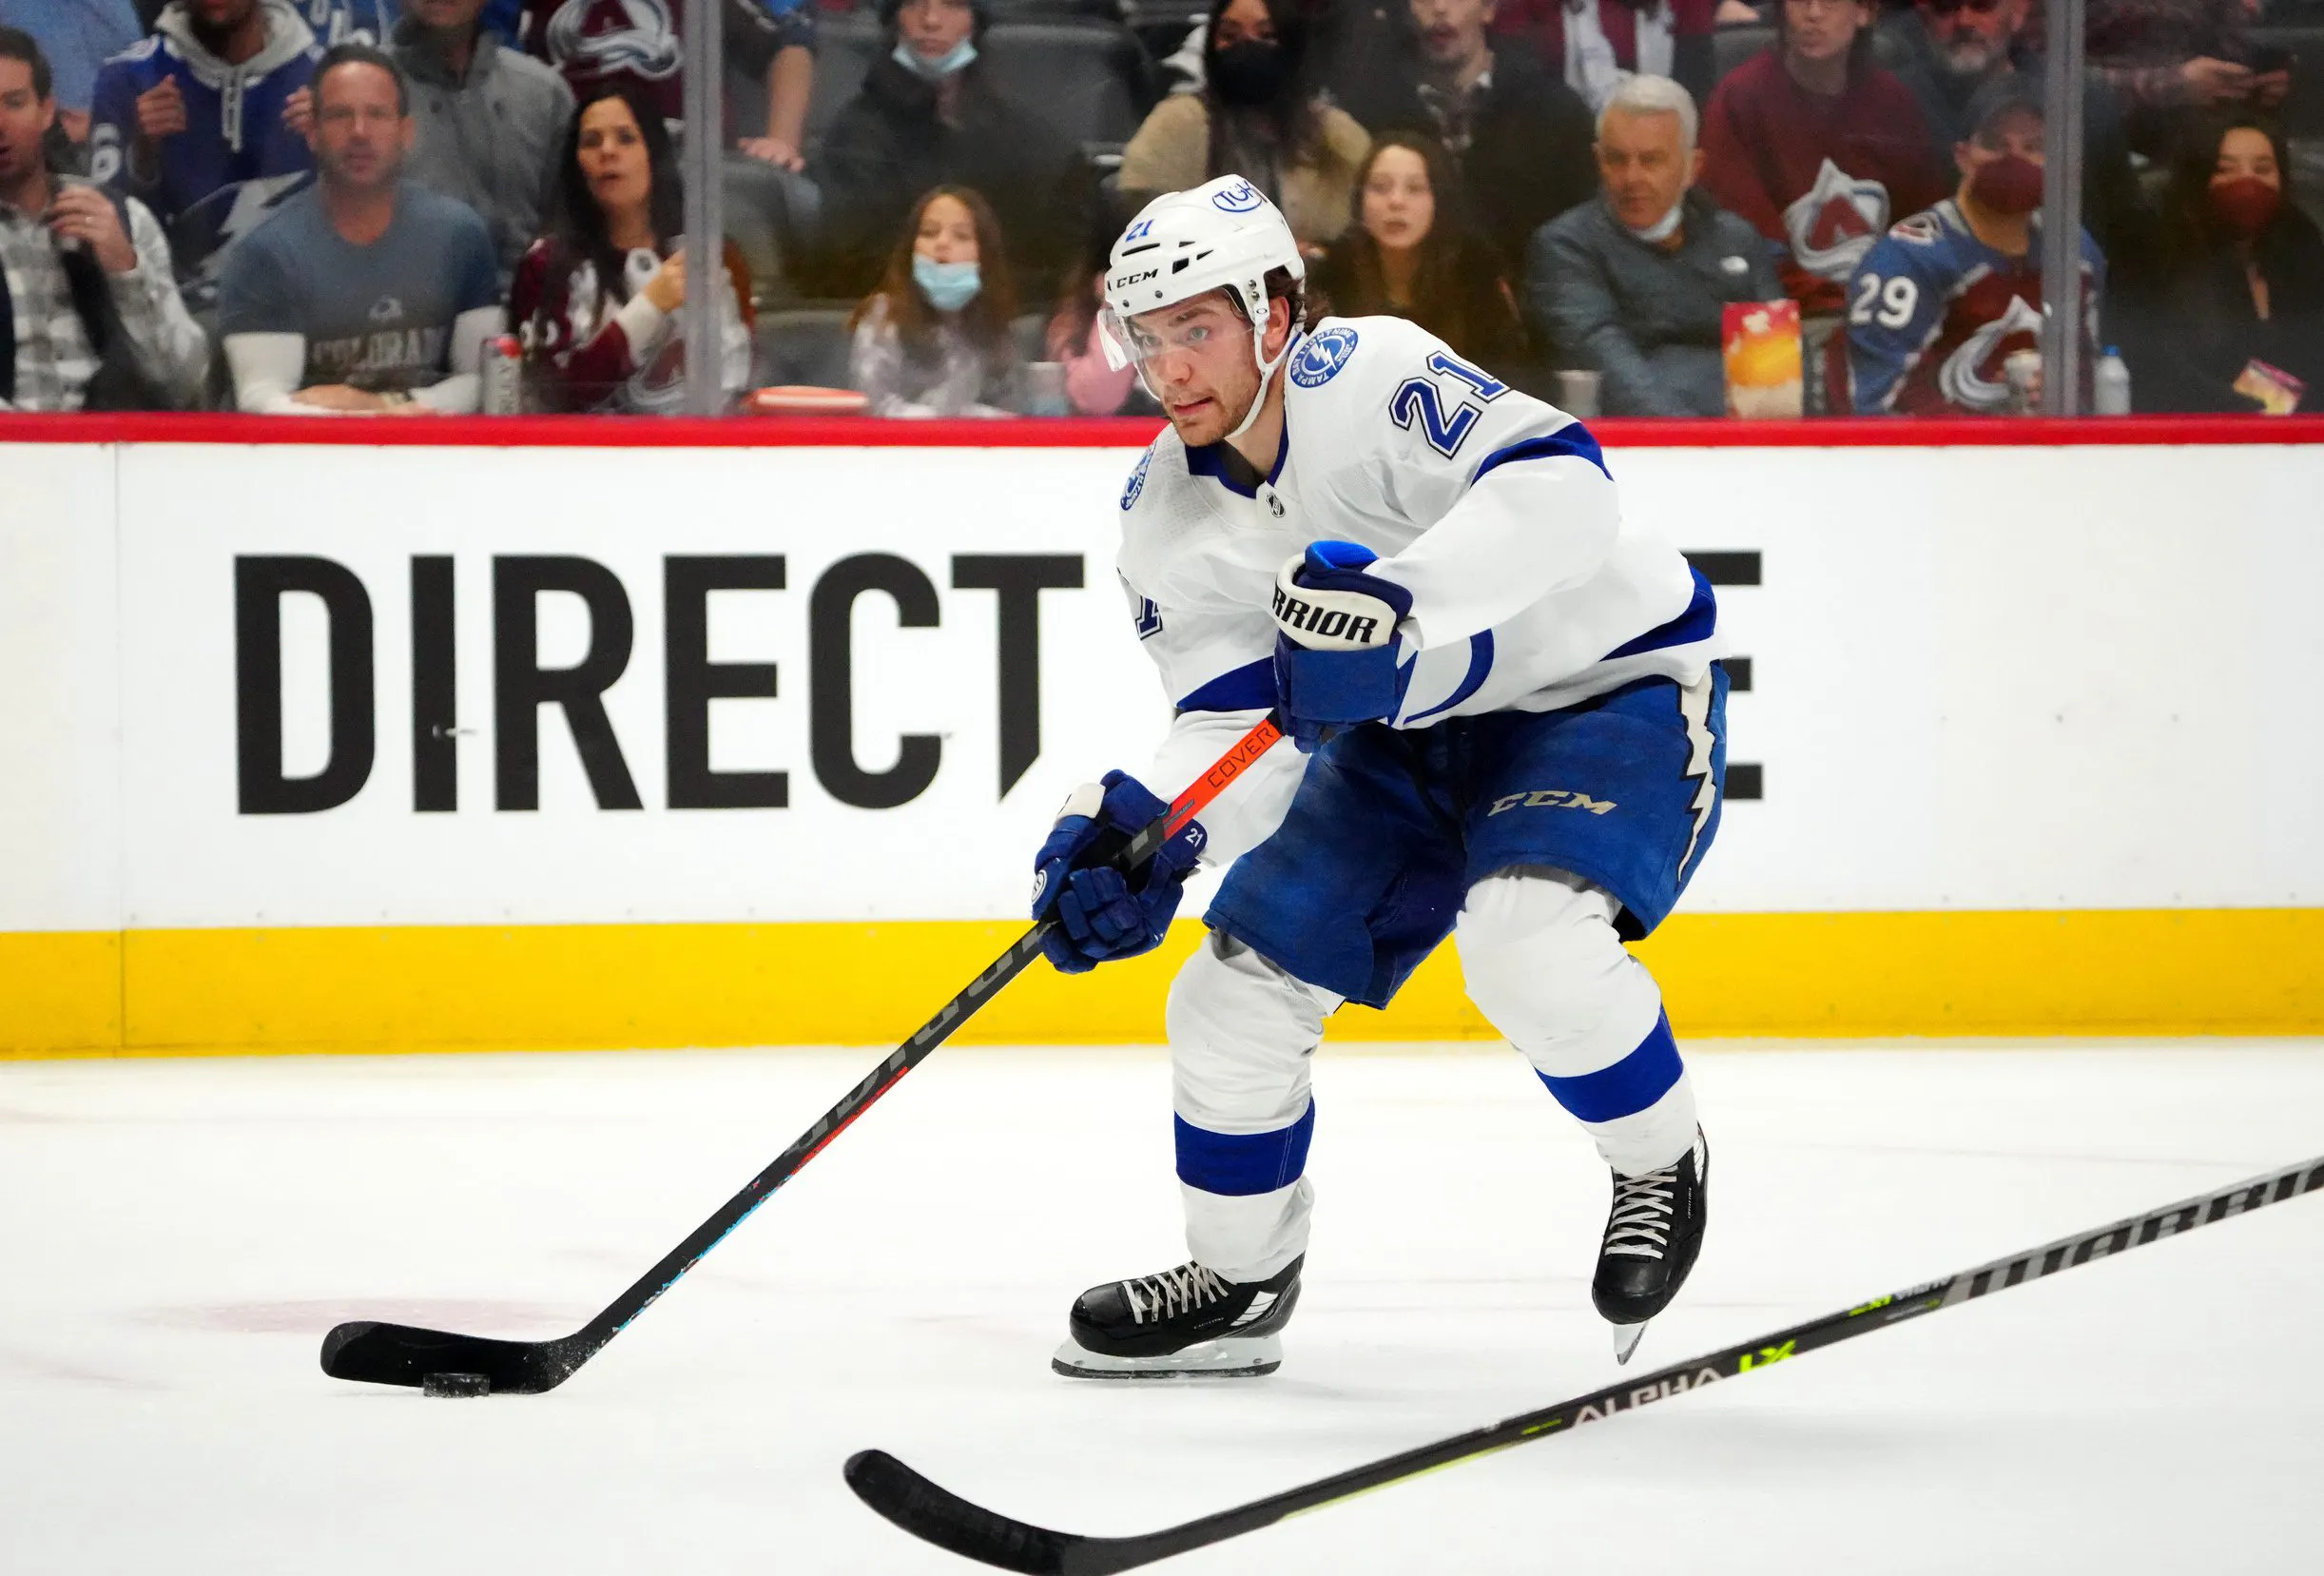 Lightning forward Brayden Point set to play in Game 1 of the Stanley Cup Final